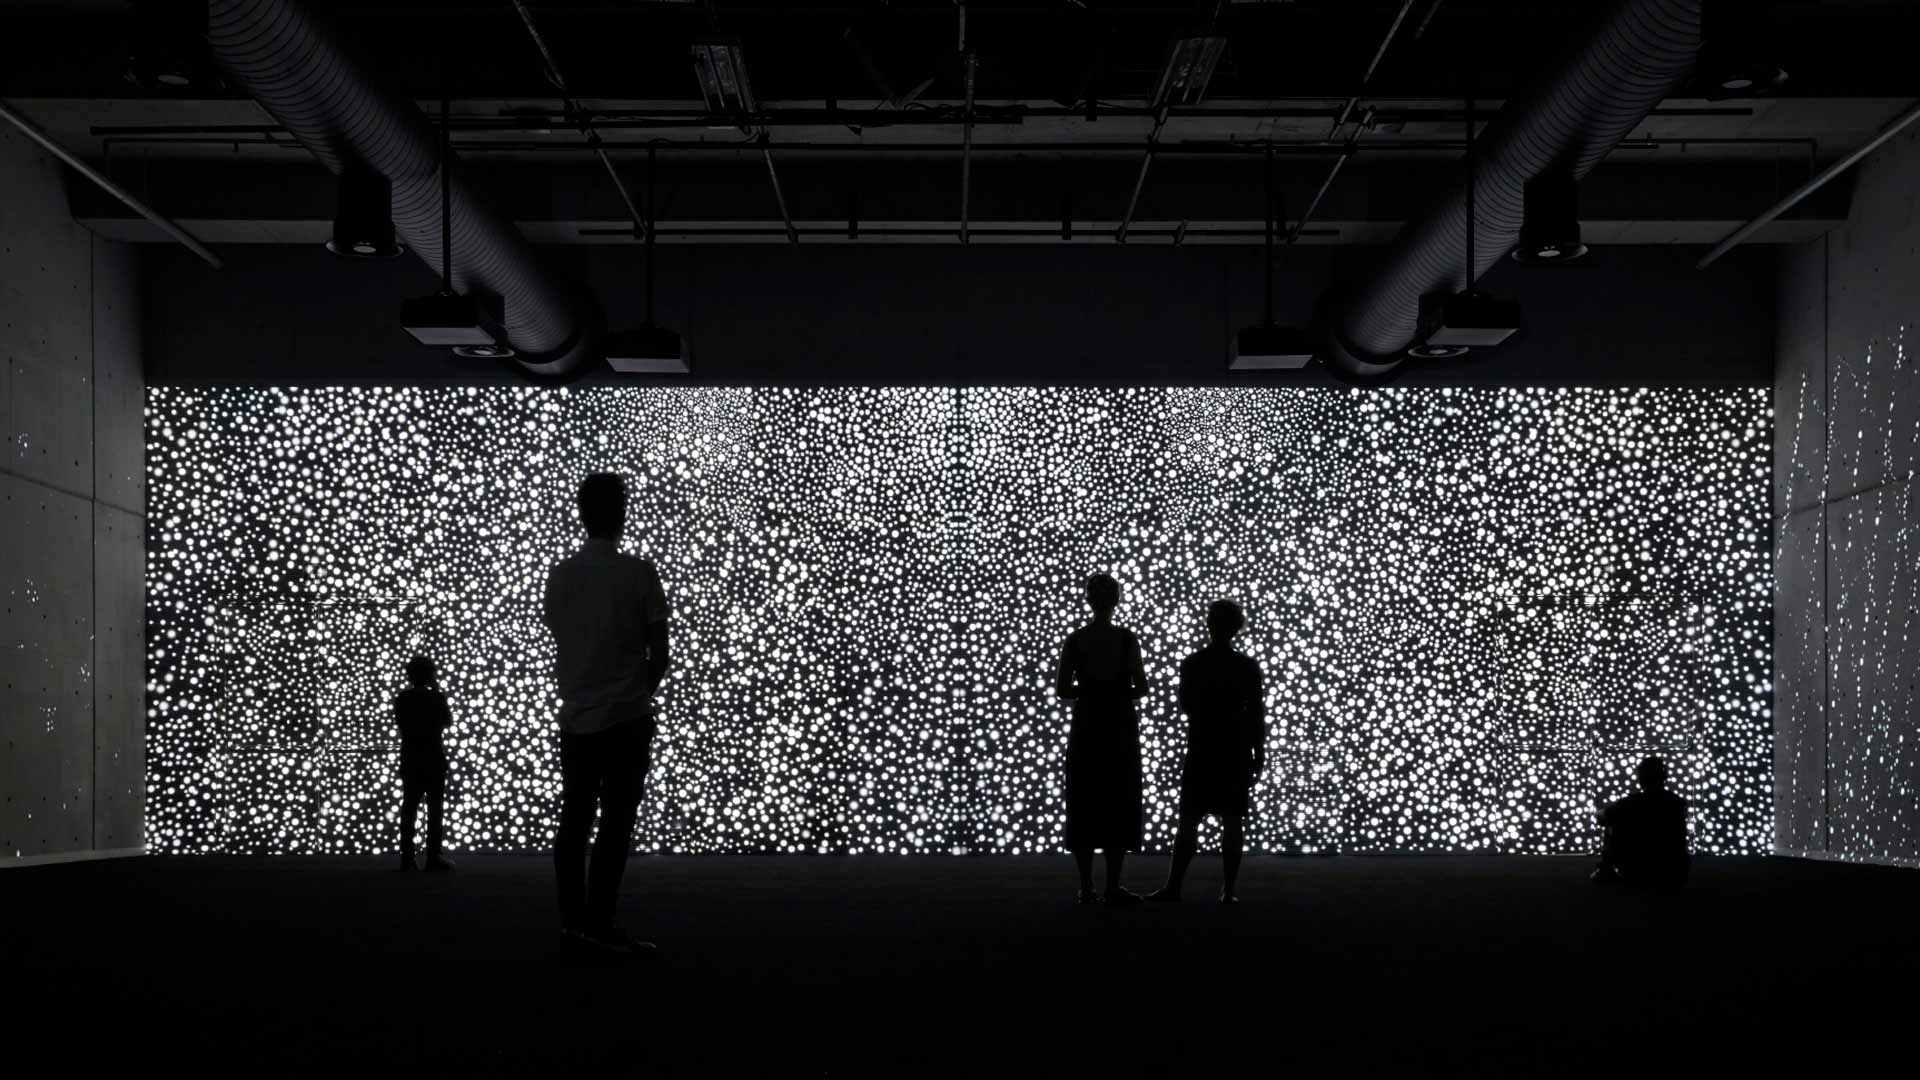 Four Immersive and Illuminating Installations Have Landed at Carriageworks for Summer